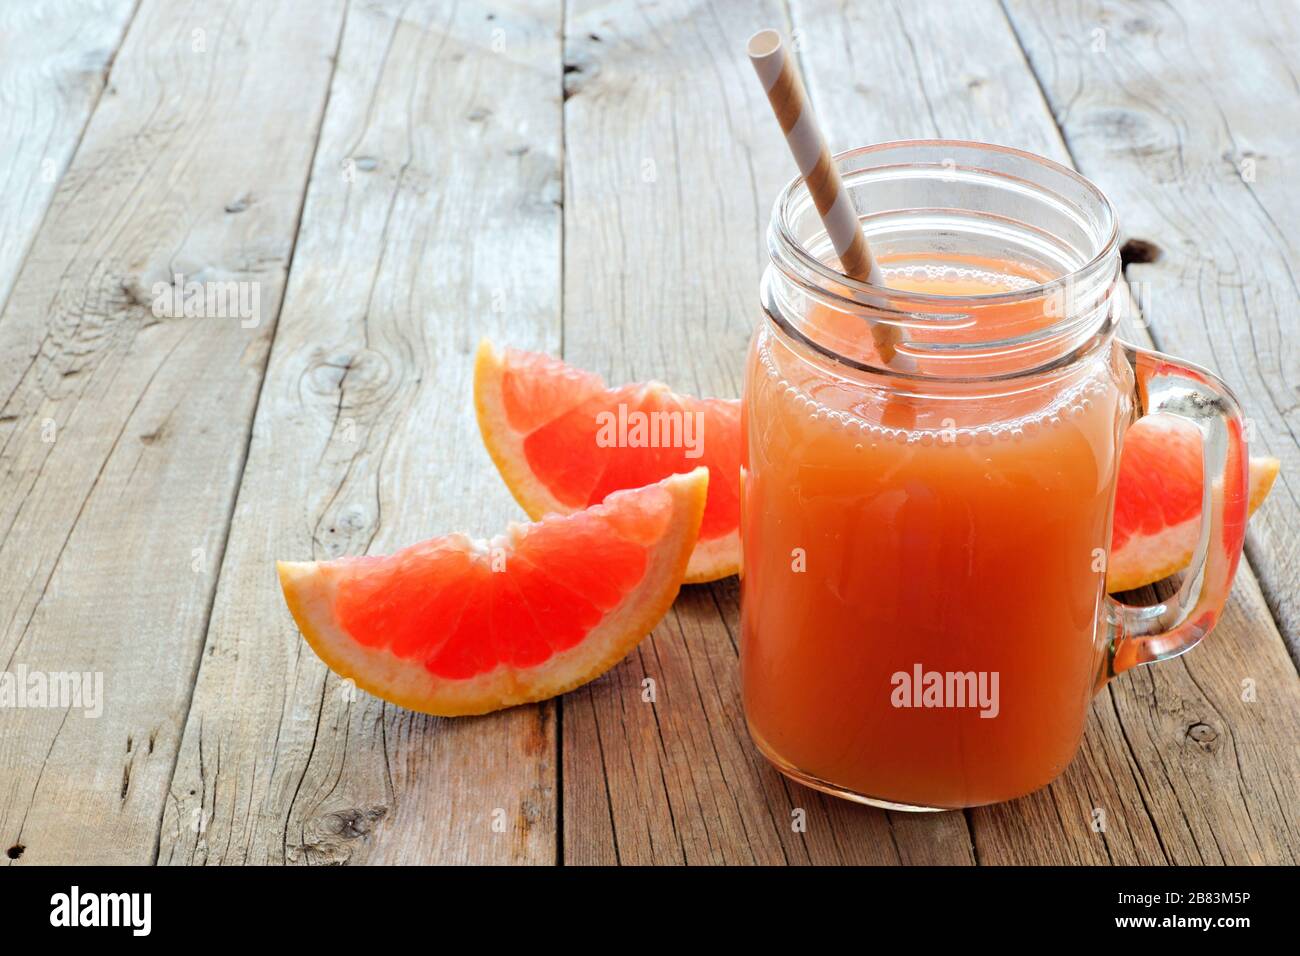 Mason jar glass of grapefruit juice with fruit slices and straws on rustic wooden background Stock Photo